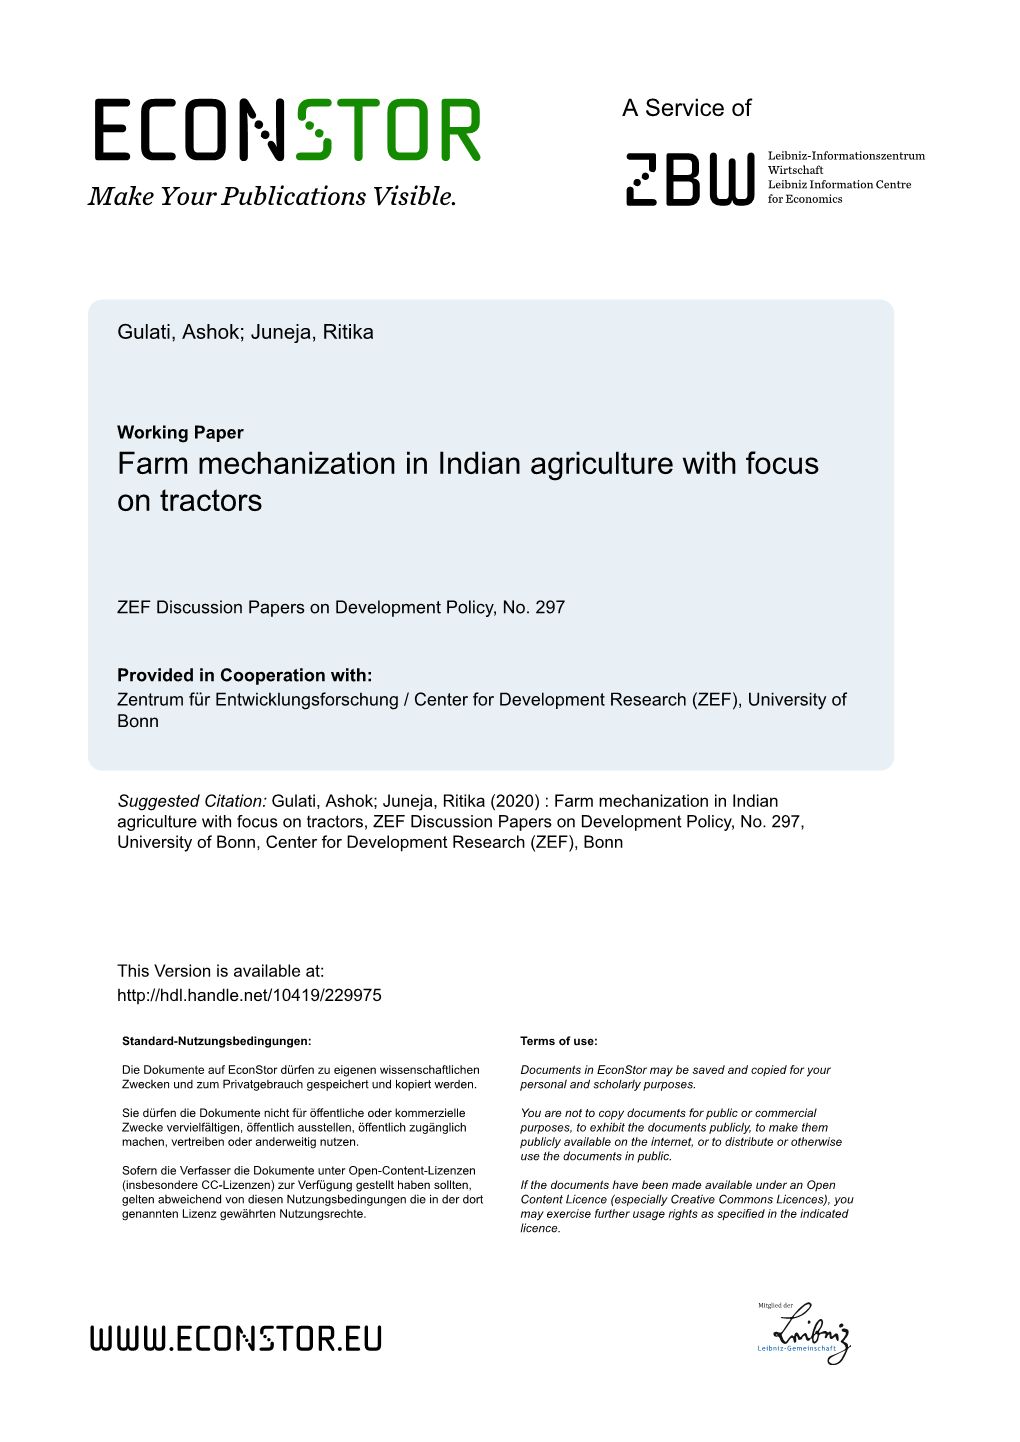 Farm Mechanization in Indian Agriculture with Focus on Tractors